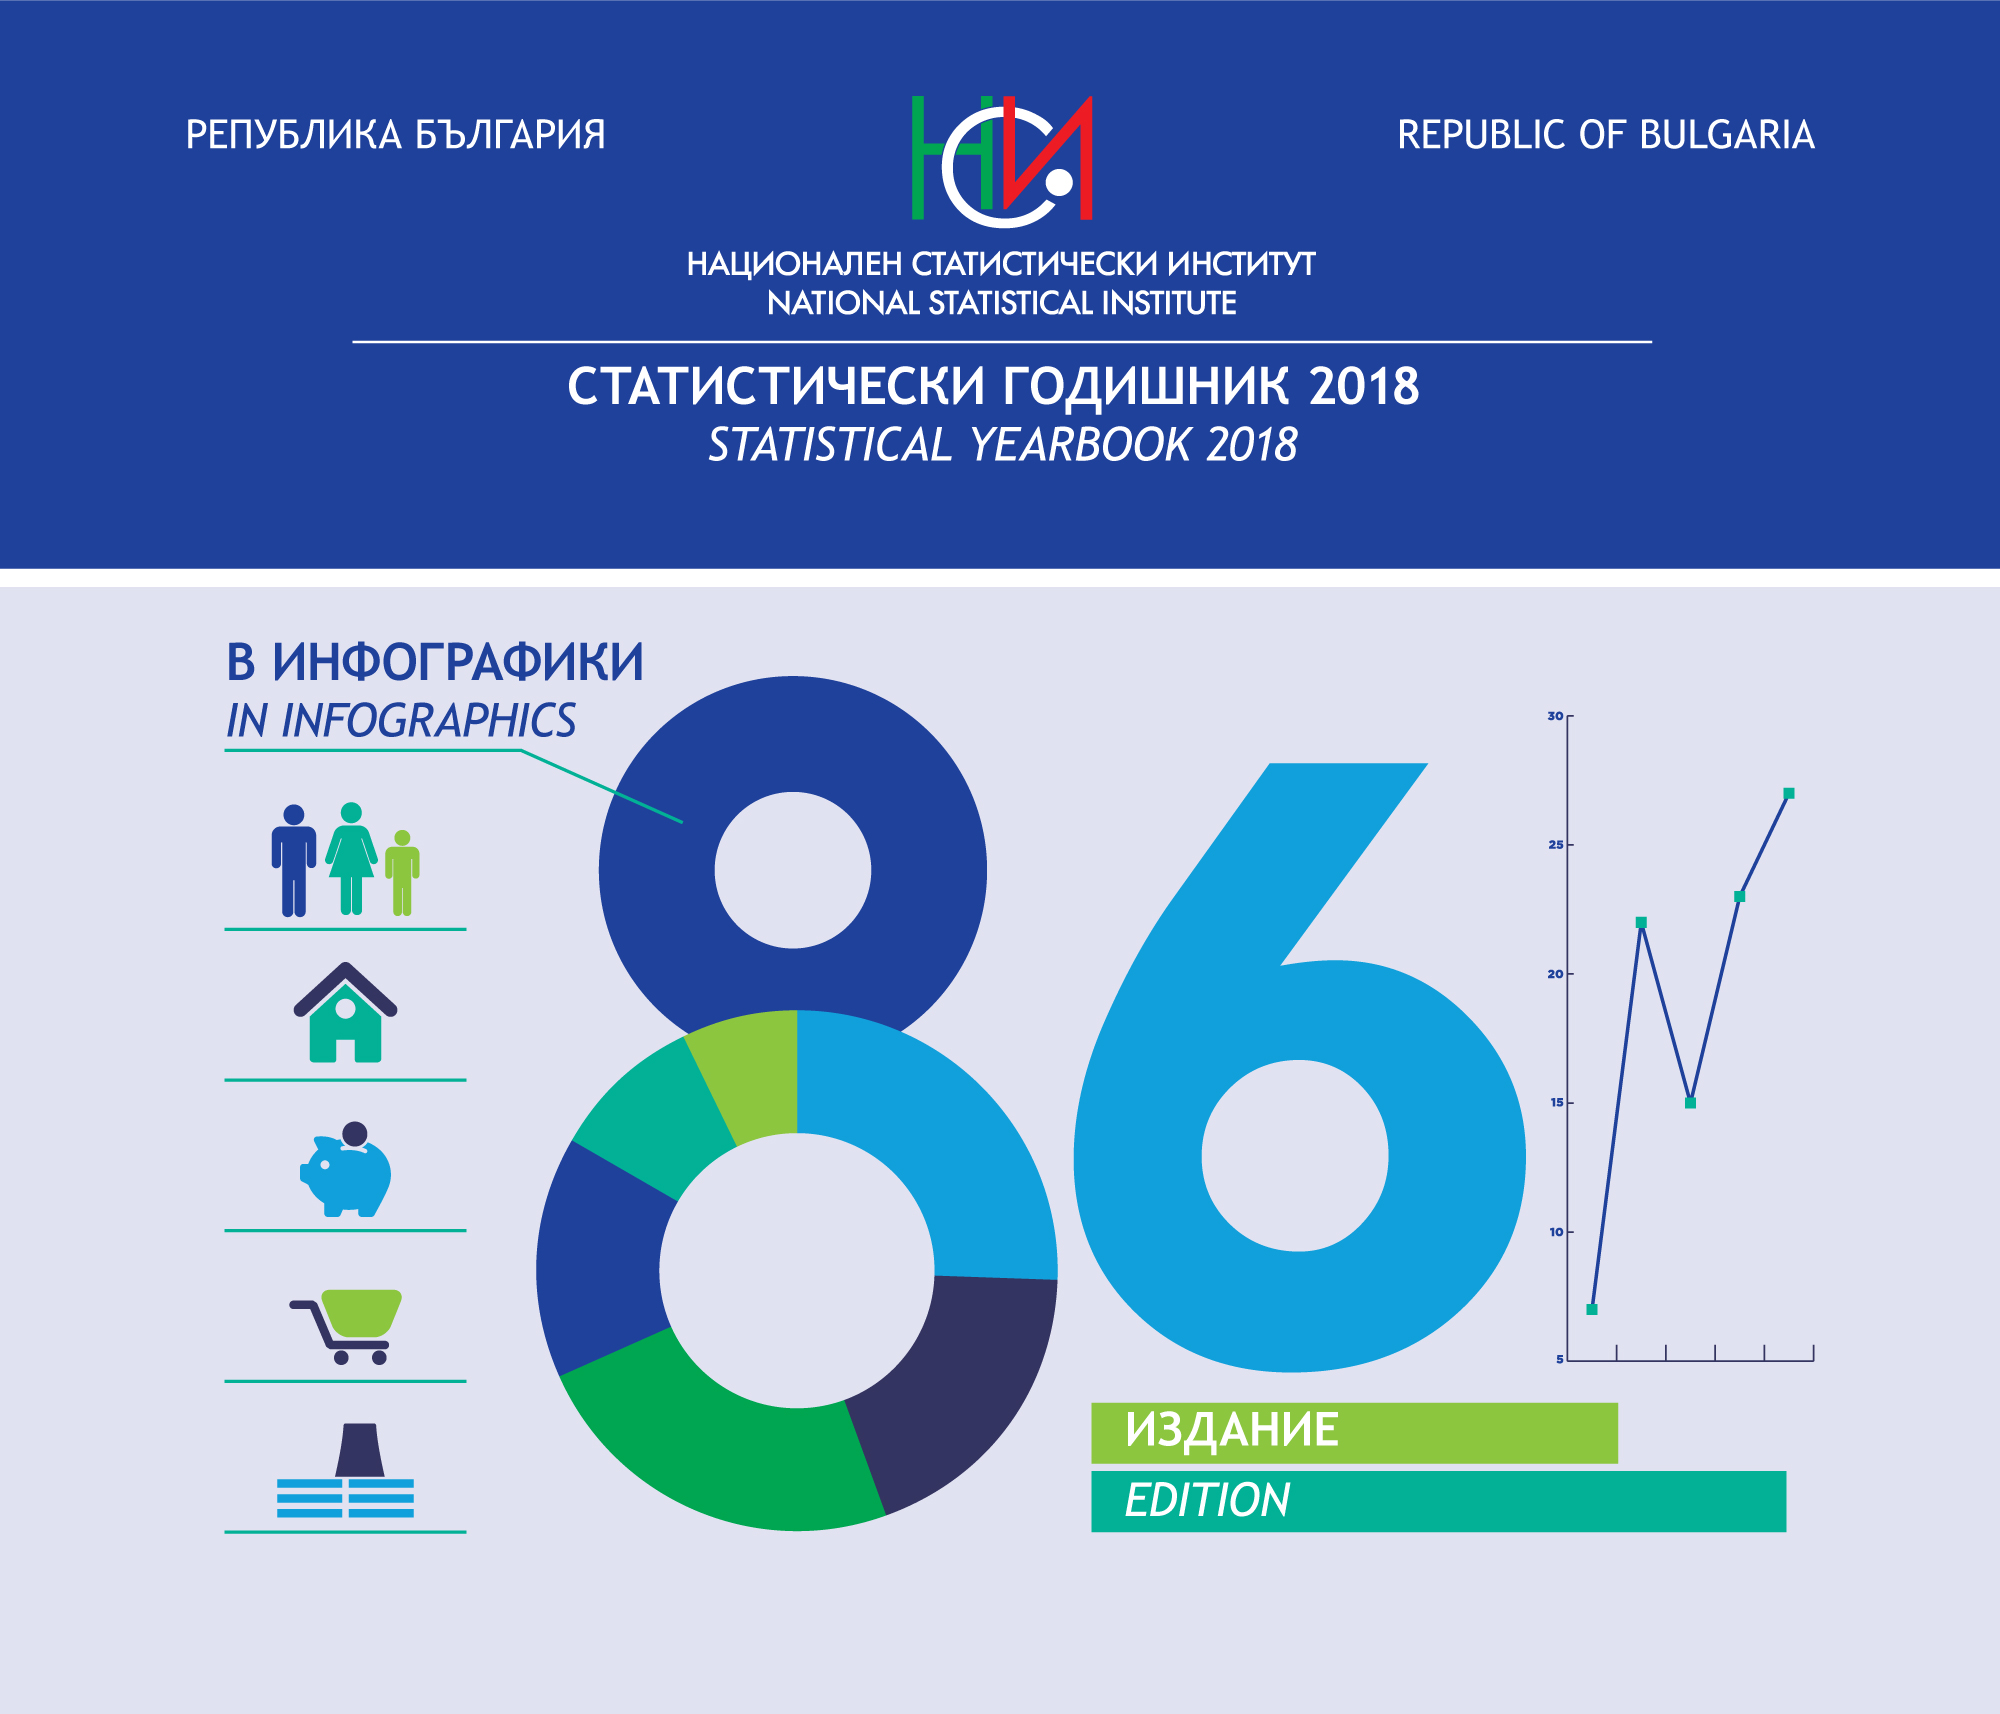 Statistical Yearbook 2018 in infographics